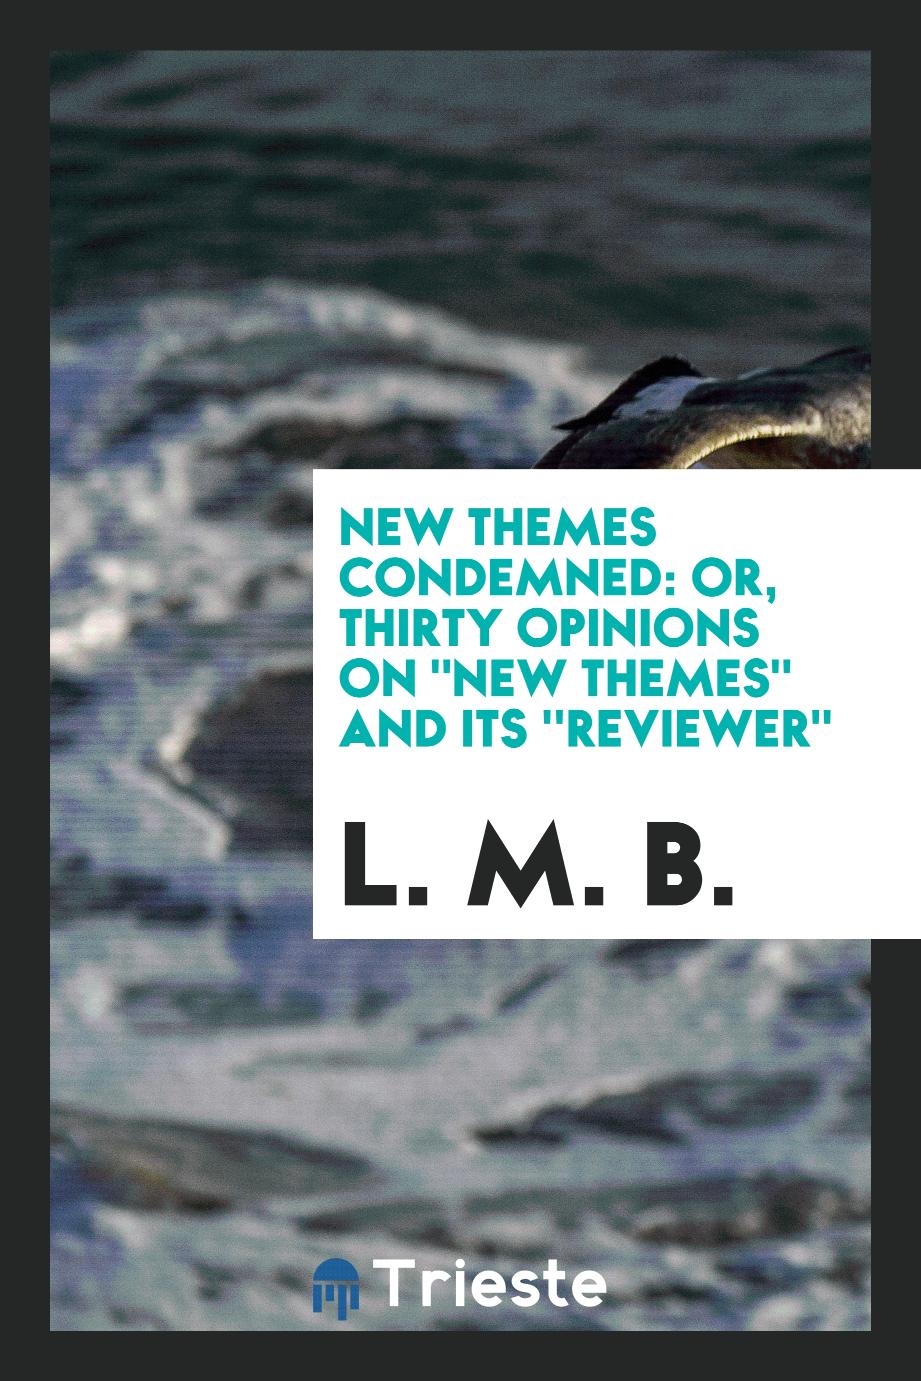 New Themes Condemned: Or, Thirty Opinions On "New Themes" and Its ''Reviewer"